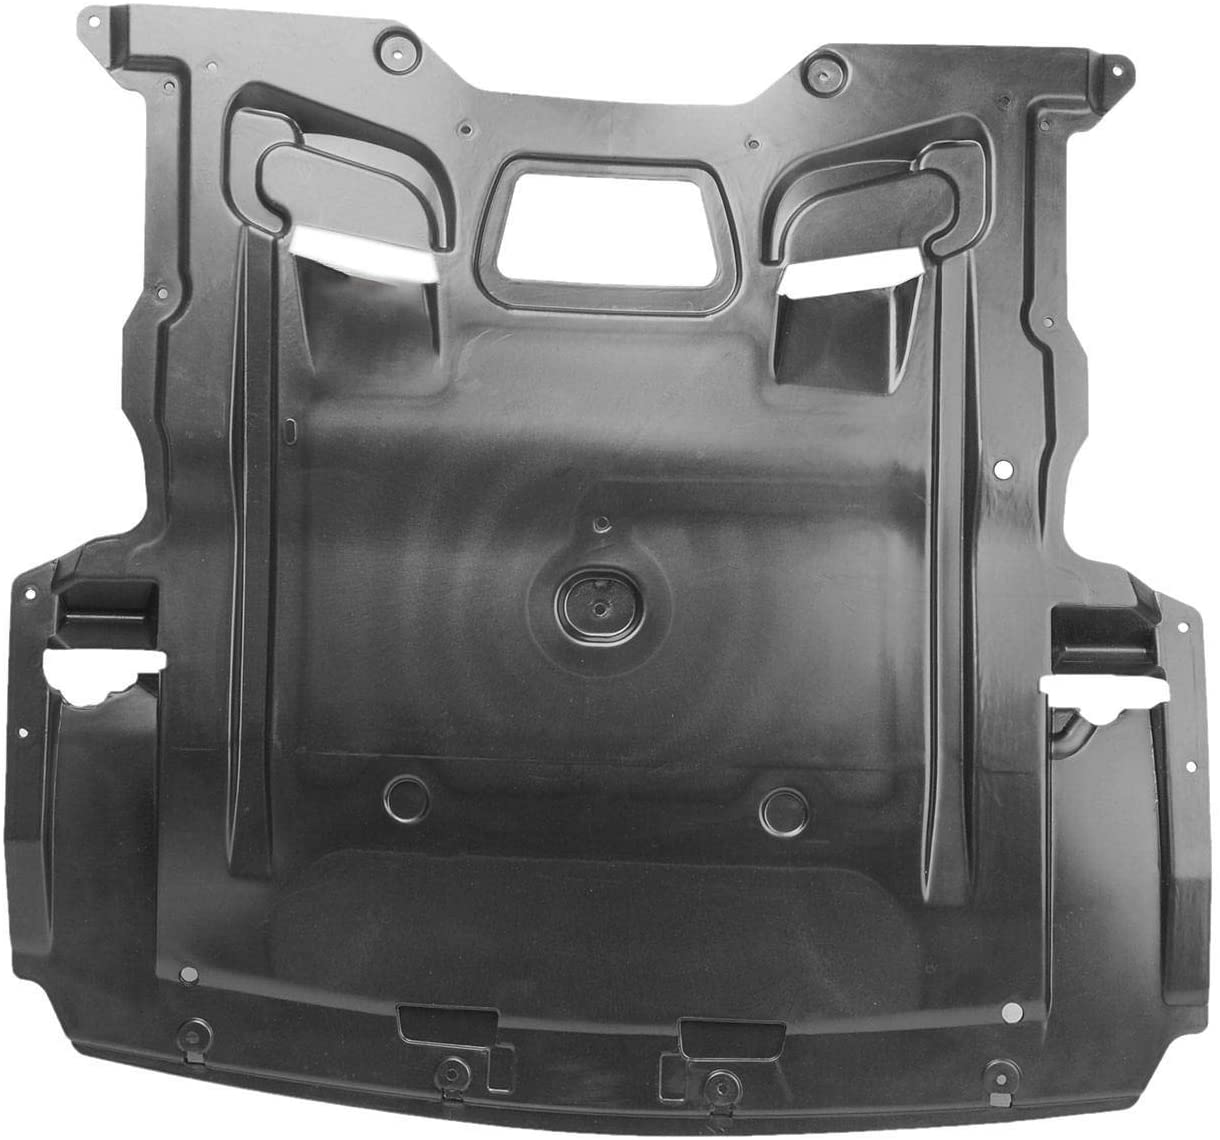 Aftermarket UNDER ENGINE COVERS for BMW - 550I, 550i,11-16,Lower engine cover